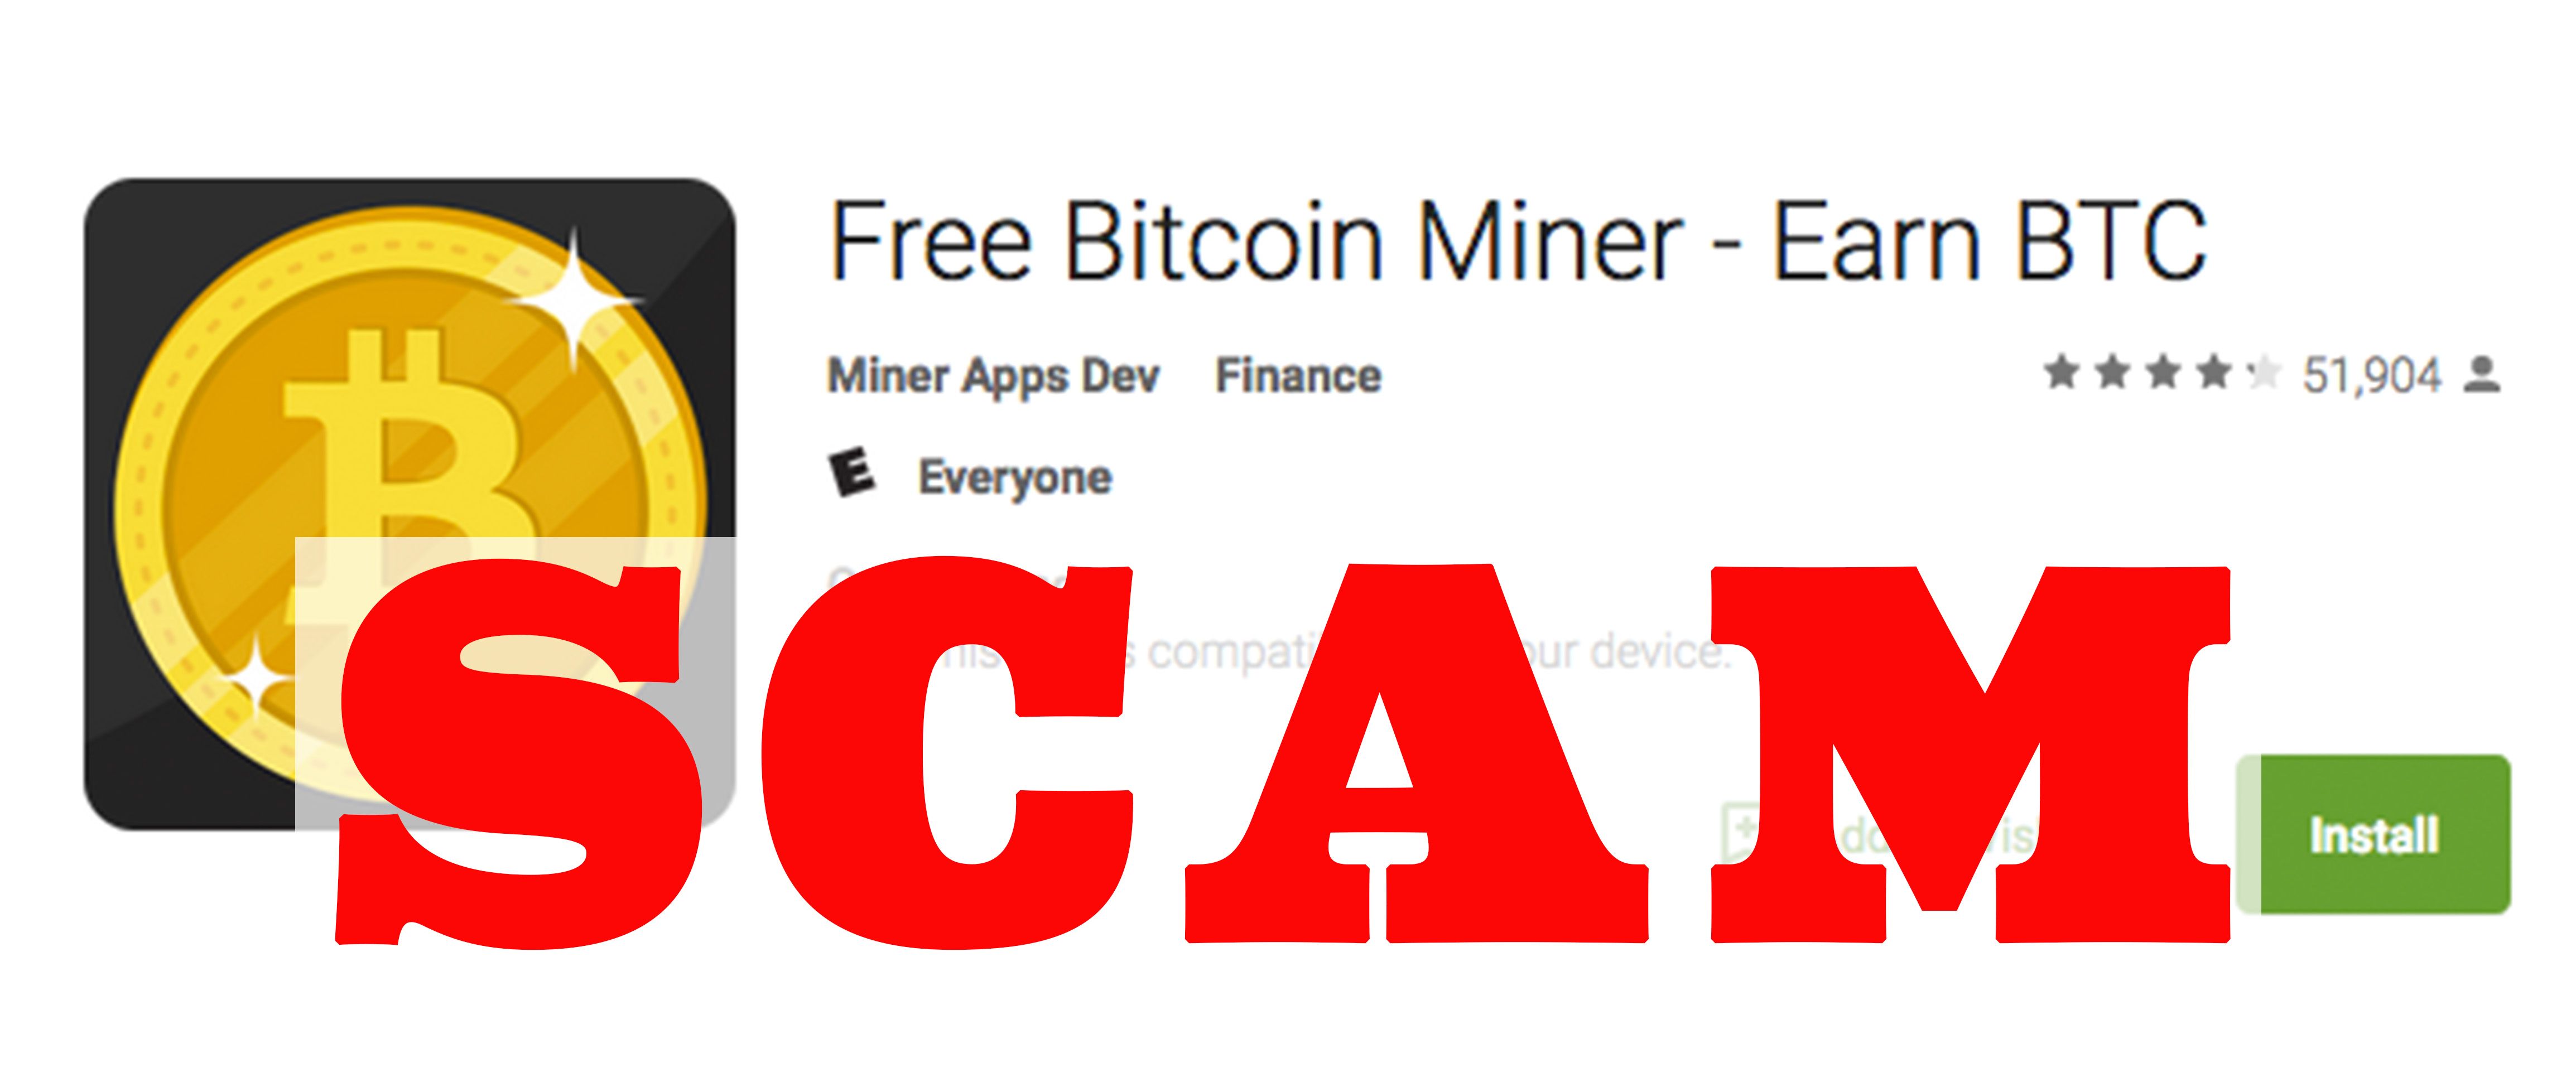 Scam Alert Free Bitcoin Mi!   ner App For Android By Miner Apps Dev - 